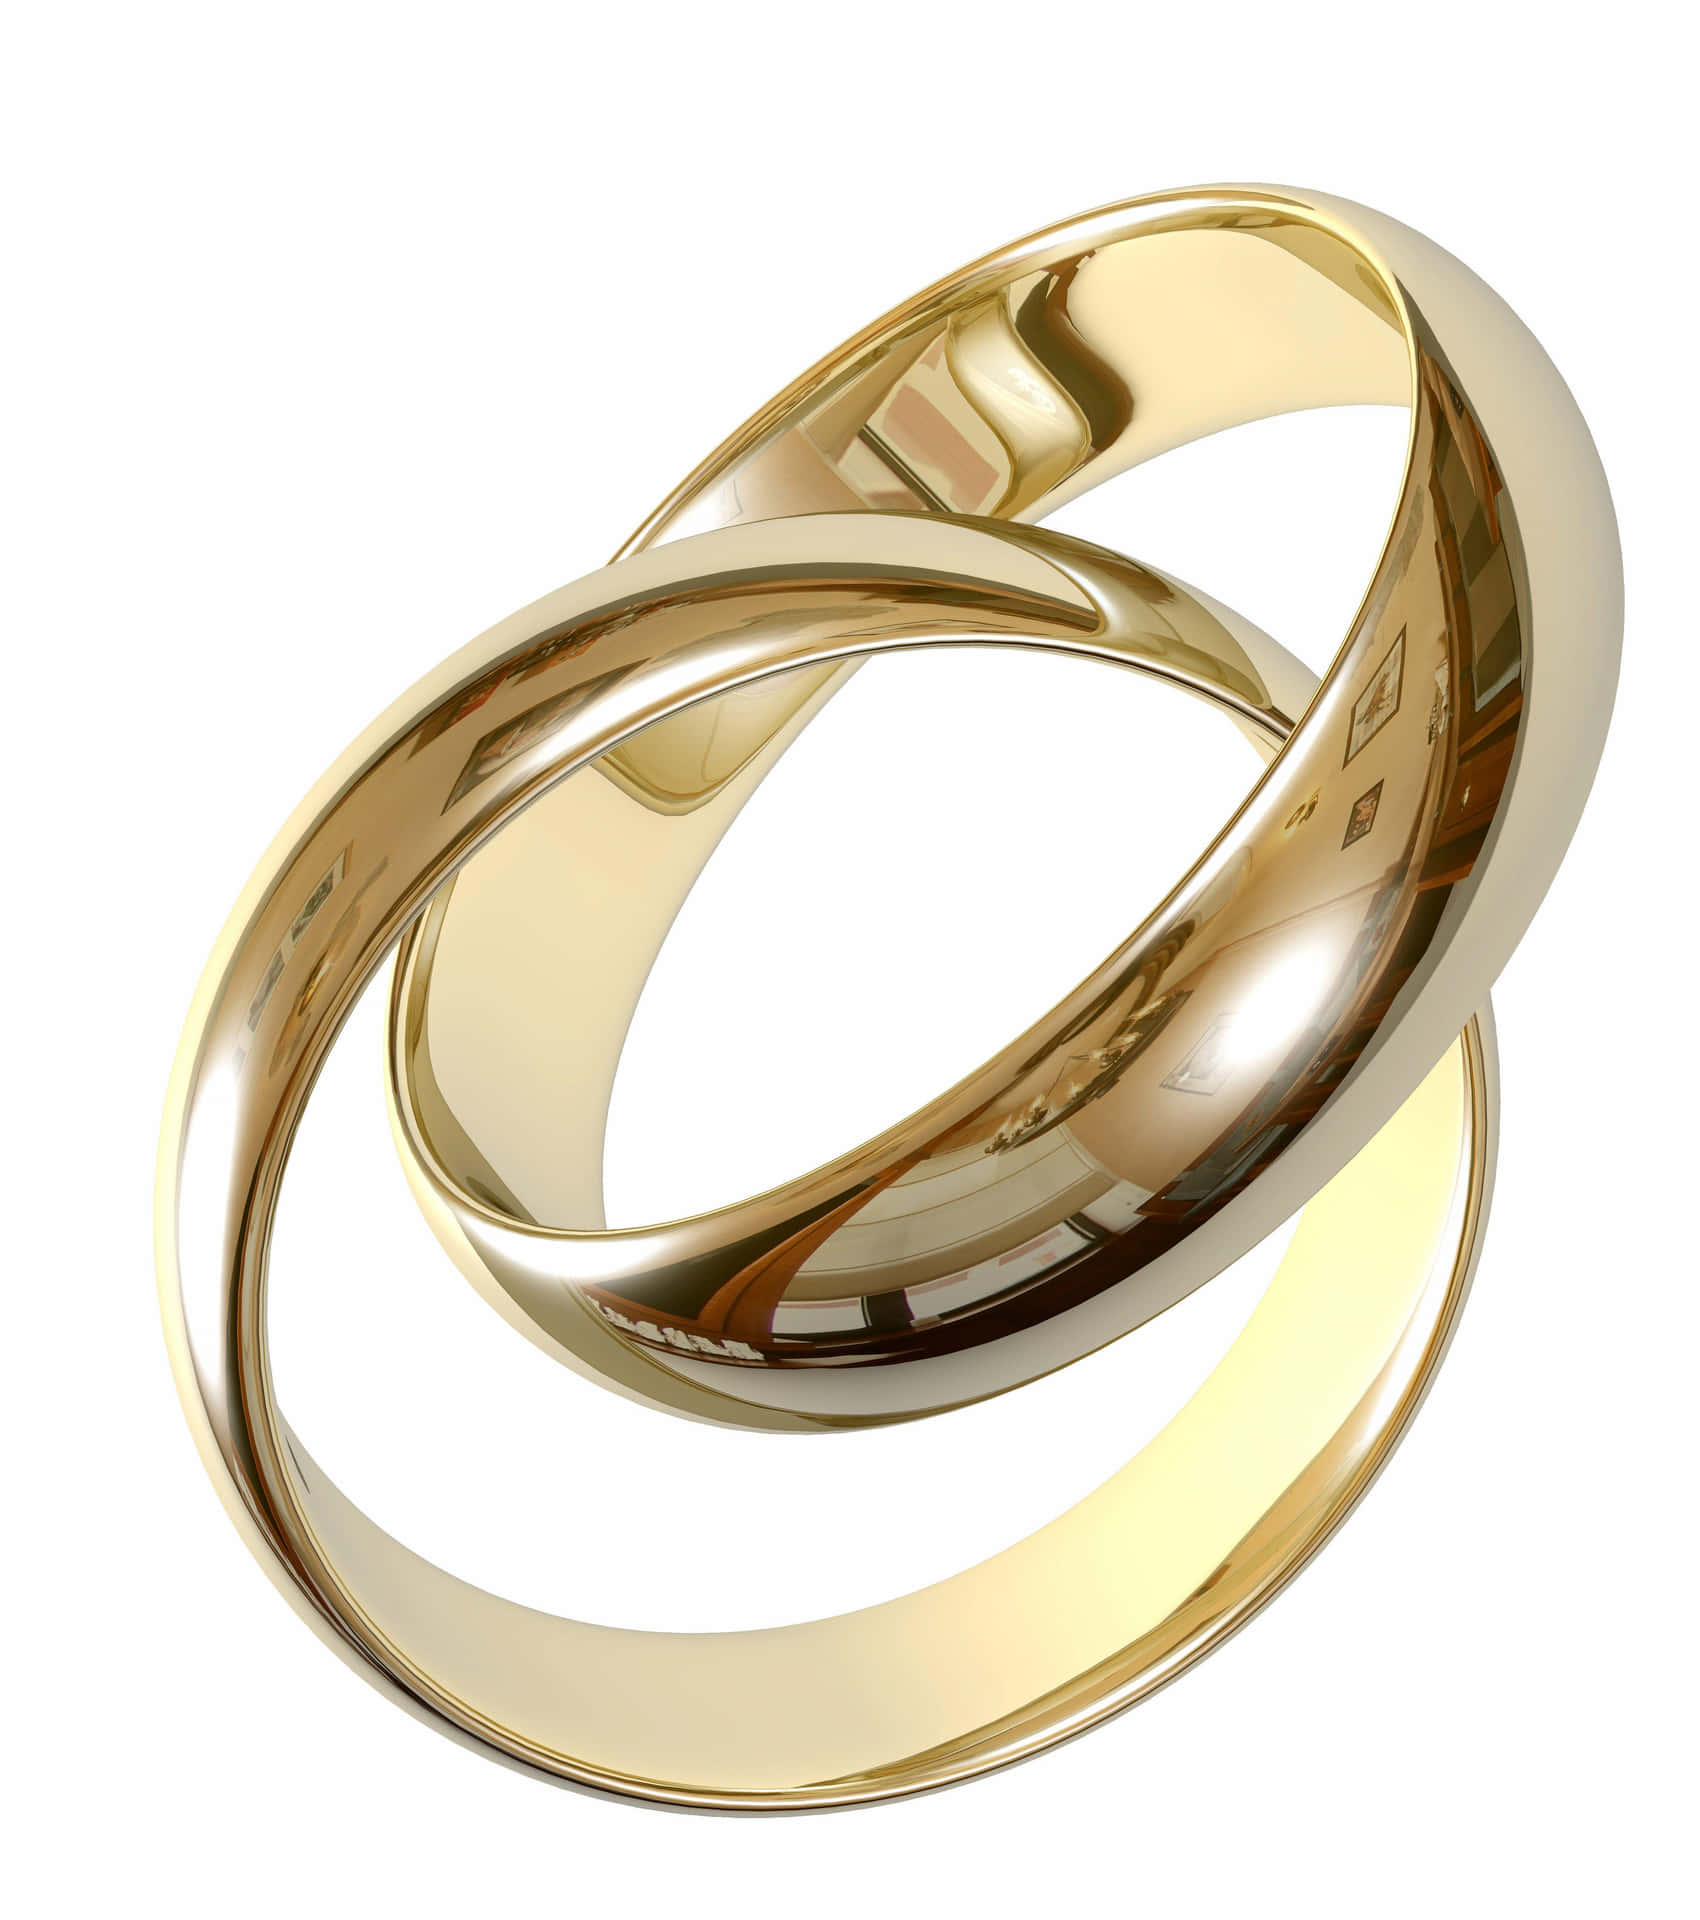 Two Gold Wedding Rings On A White Background